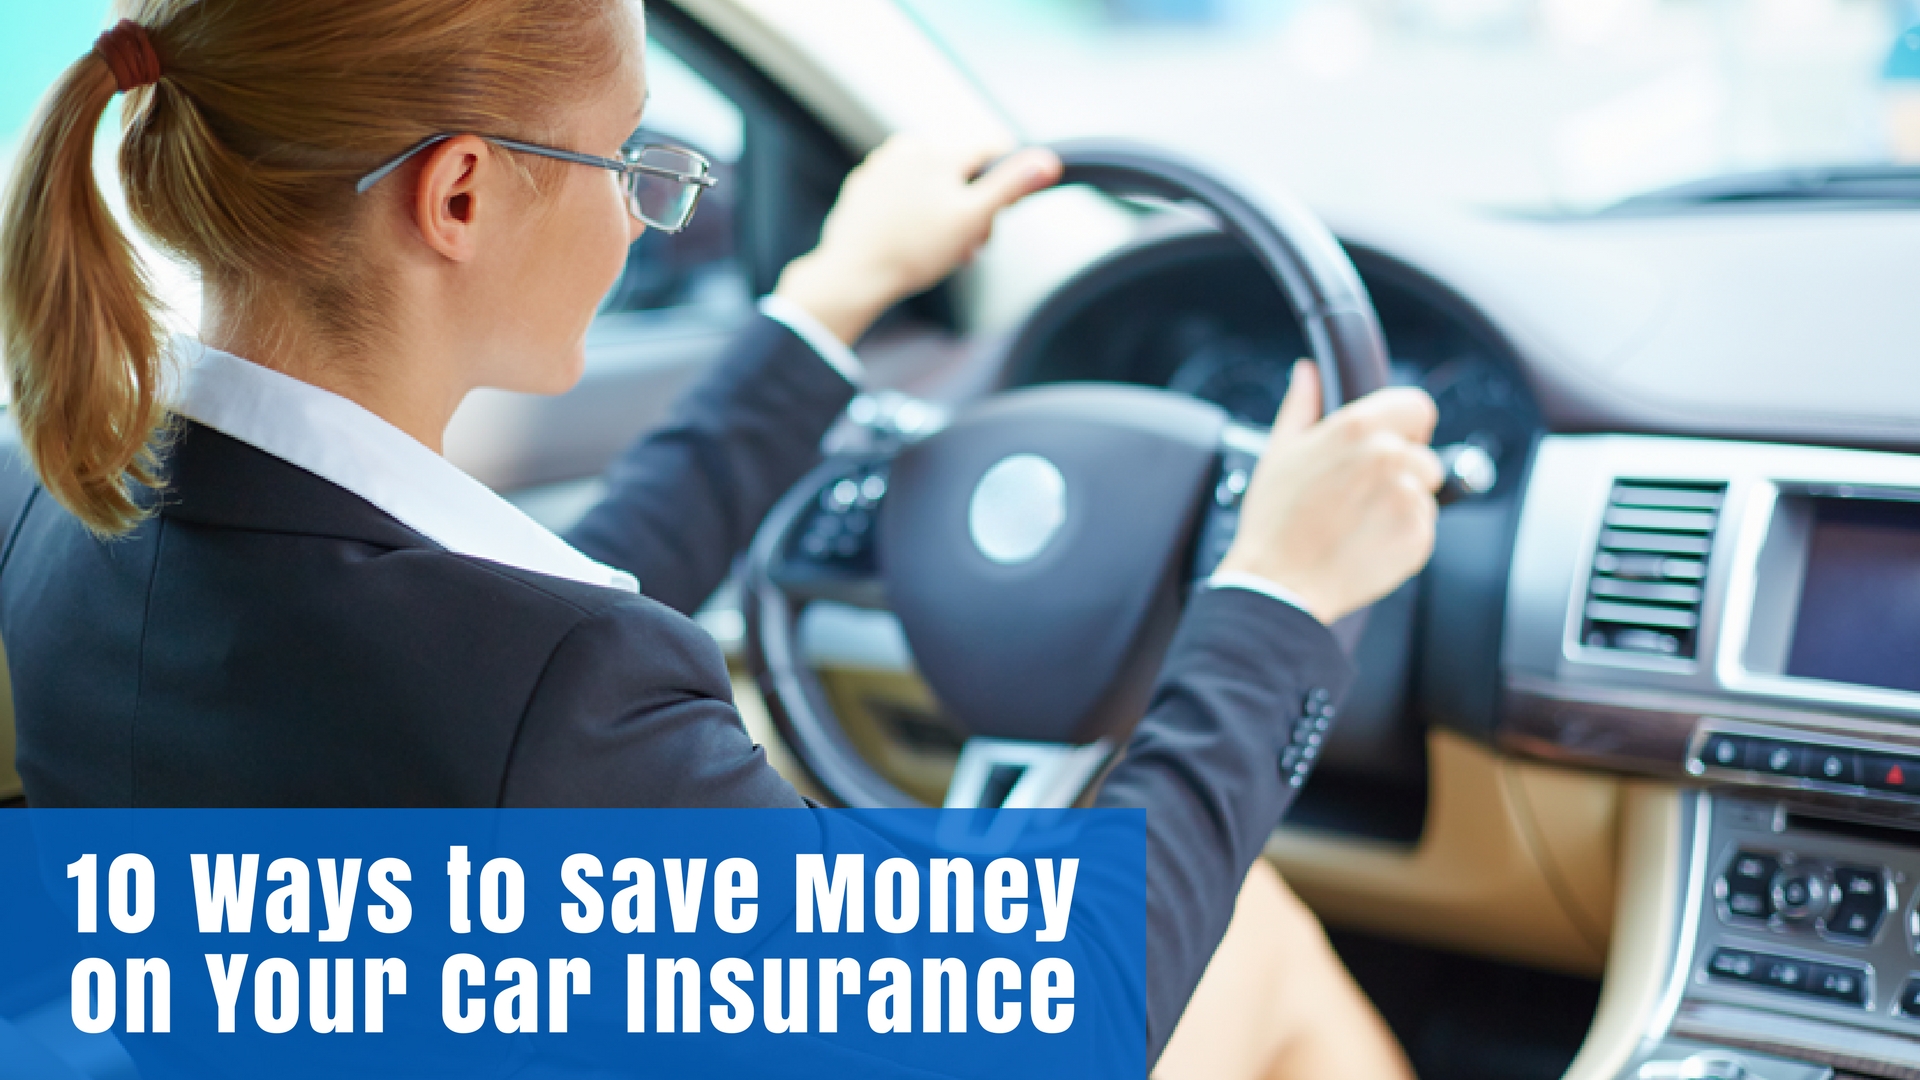 10 Ways to Save Money on Your Car Insurance